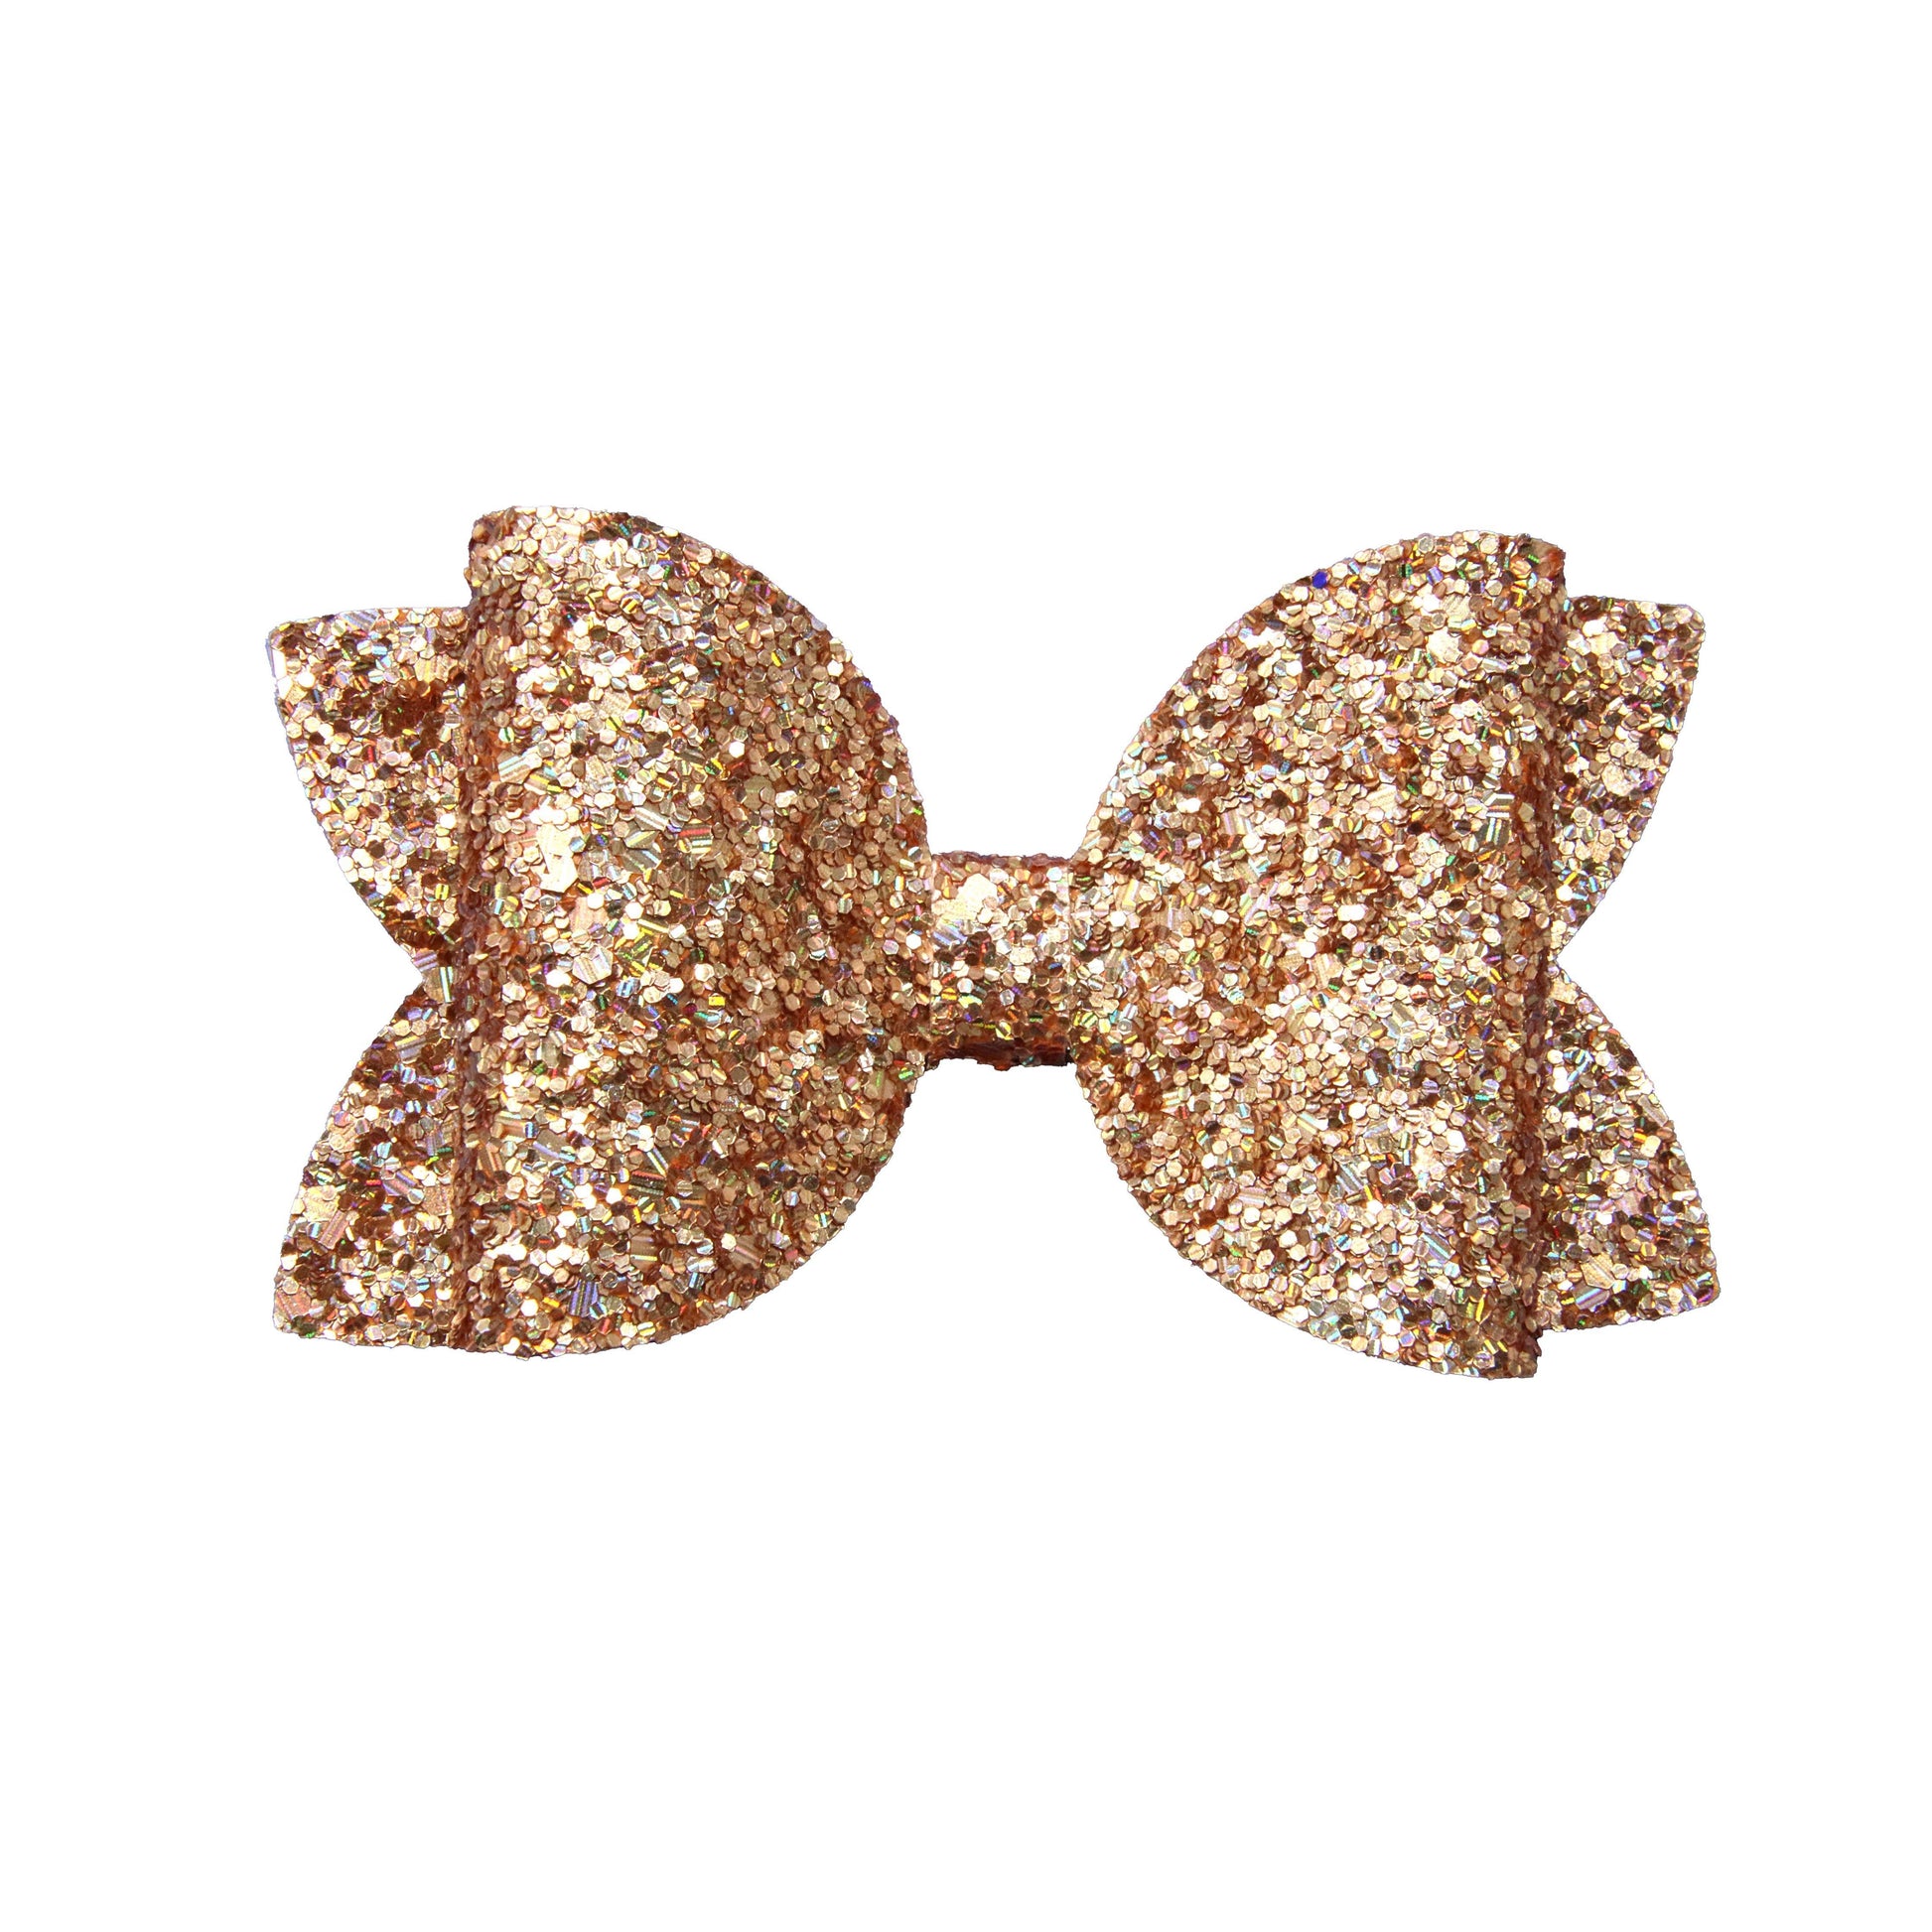 4 inch 1000 Wishes Gold Glitter Diva Bow